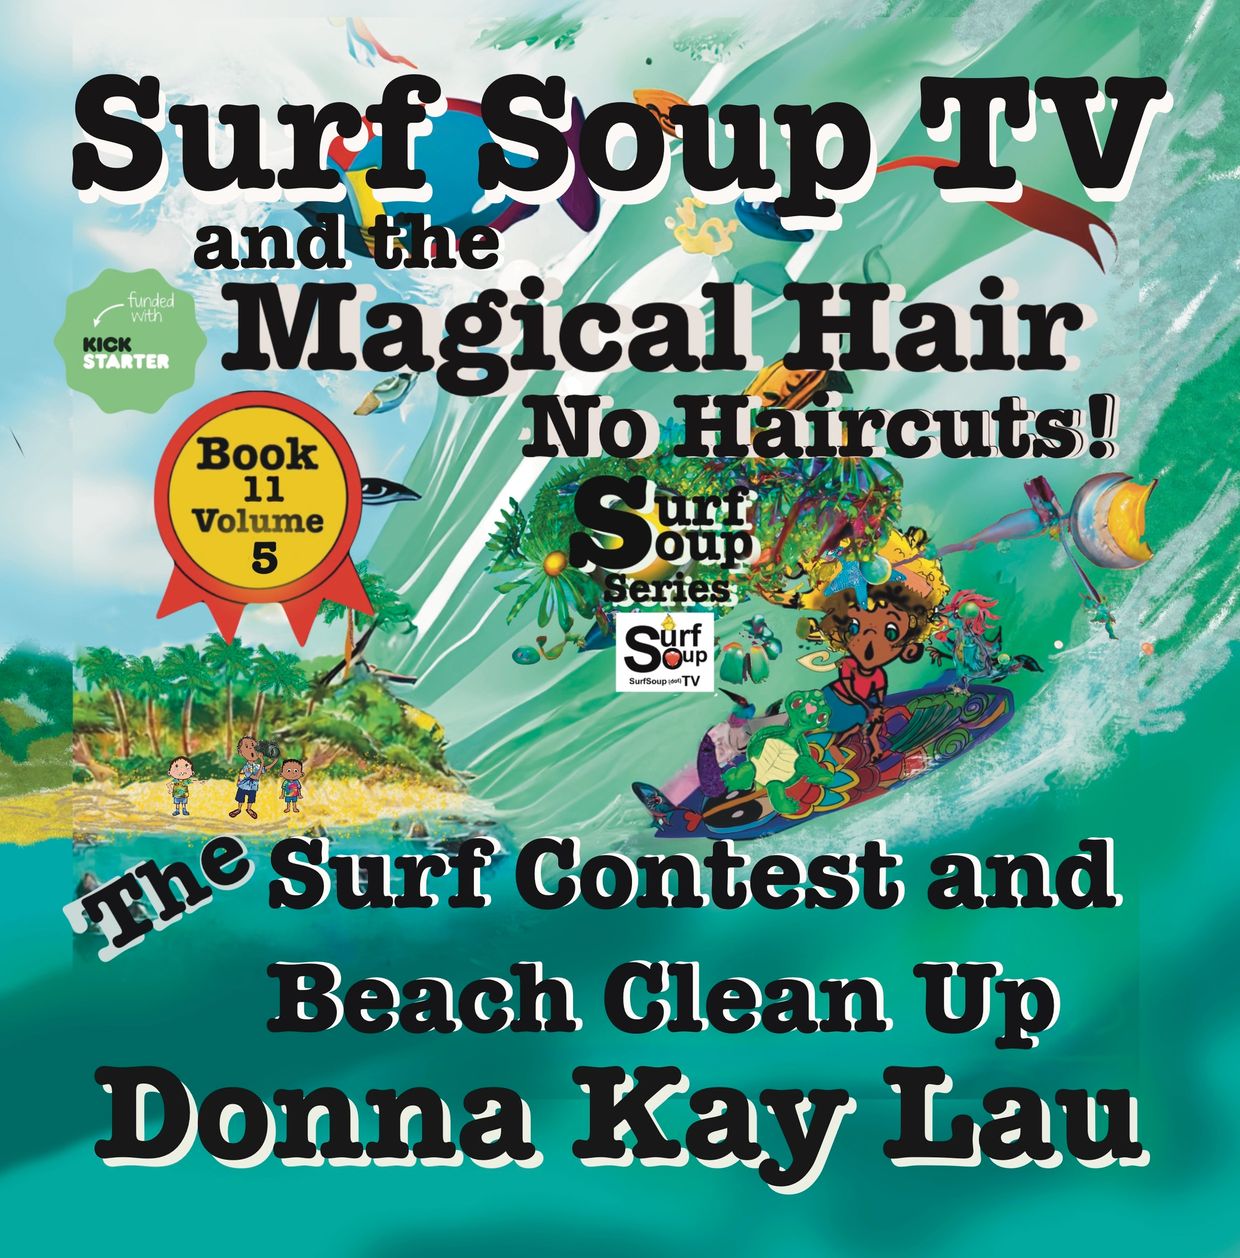 Surf Soup magical hair no to haircuts Donna Kay Lau Tv animator author book 11 volume %